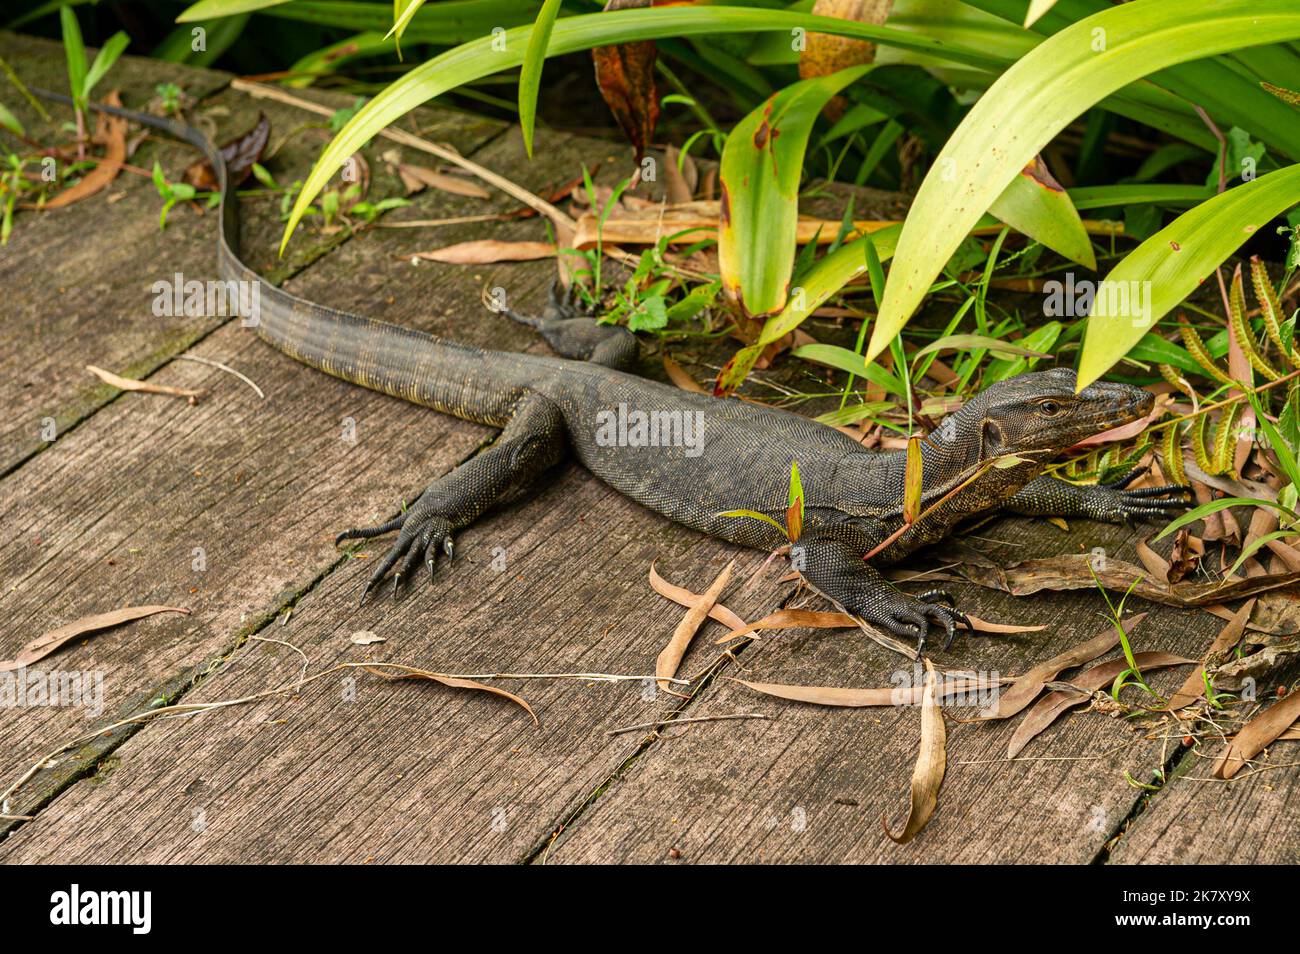 A young Monitor Lizard at Gardens by the Bay, Singapore Stock Photo